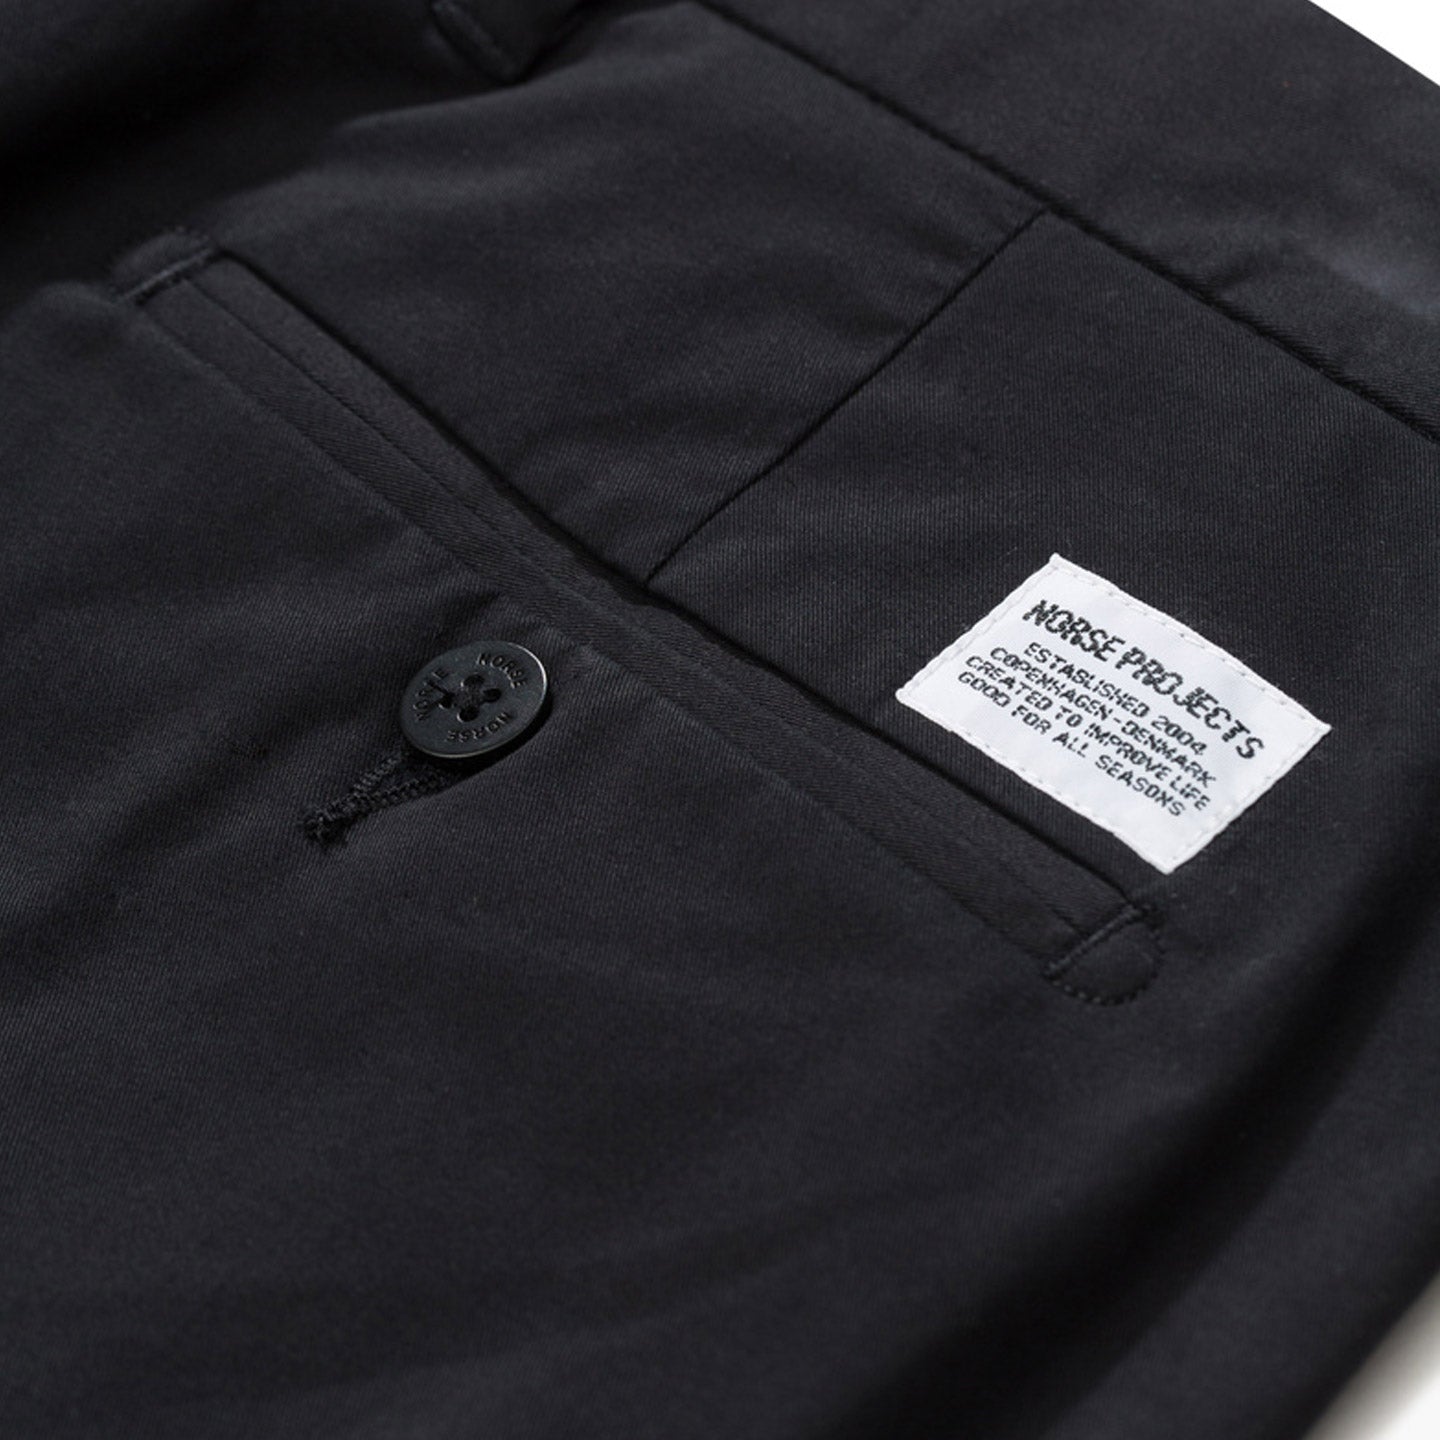 NORSE PROJECTS AROS SLIM LIGHT BLACK